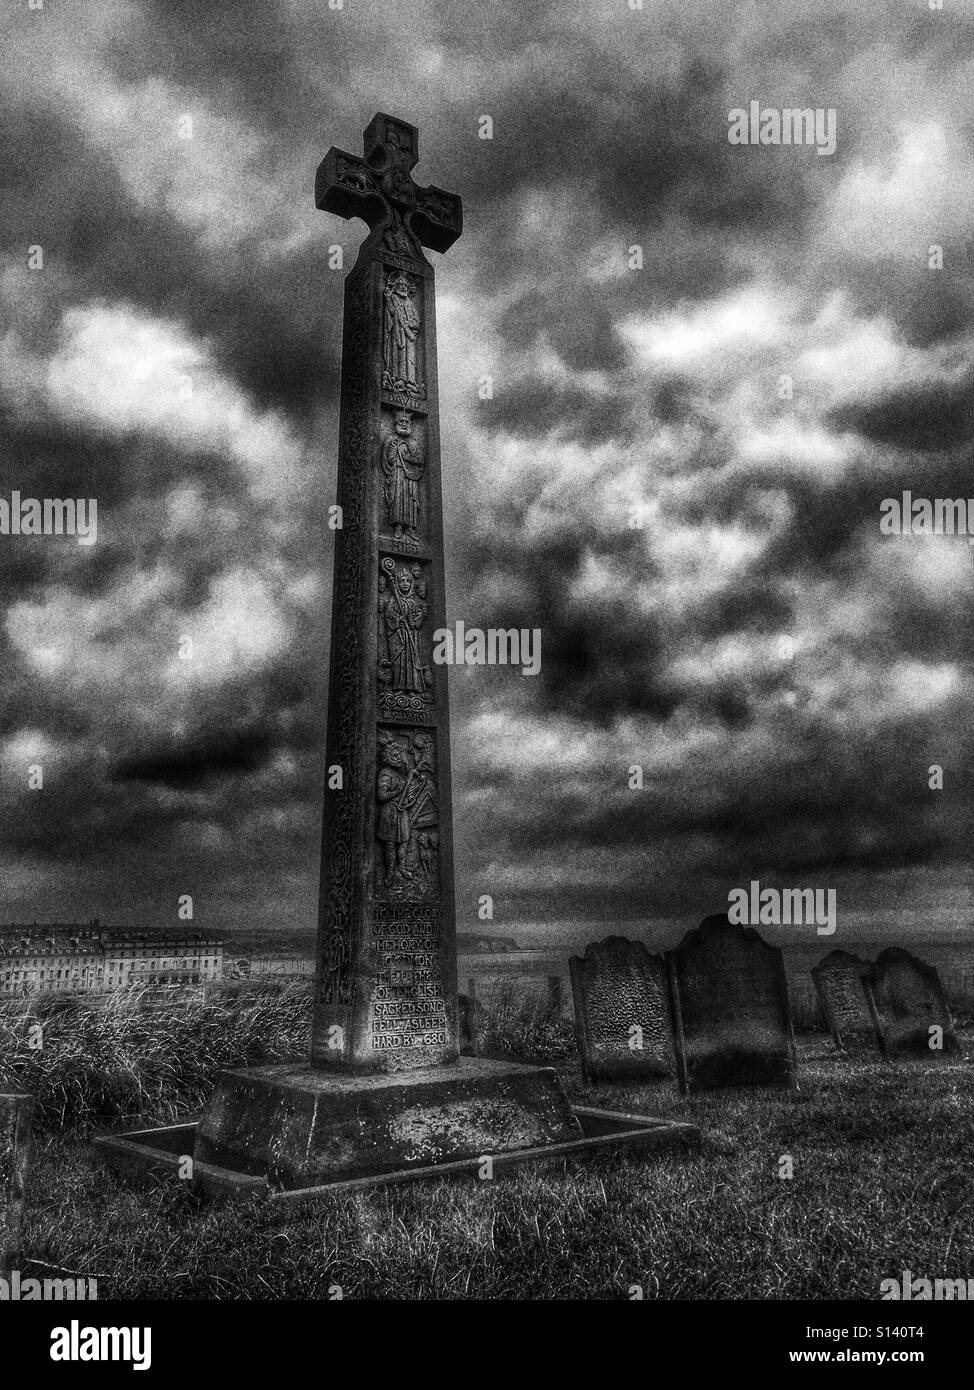 Caedmon's cross within churchyard of St Mary's Church, Whitby, North Yorkshire, England. Stock Photo